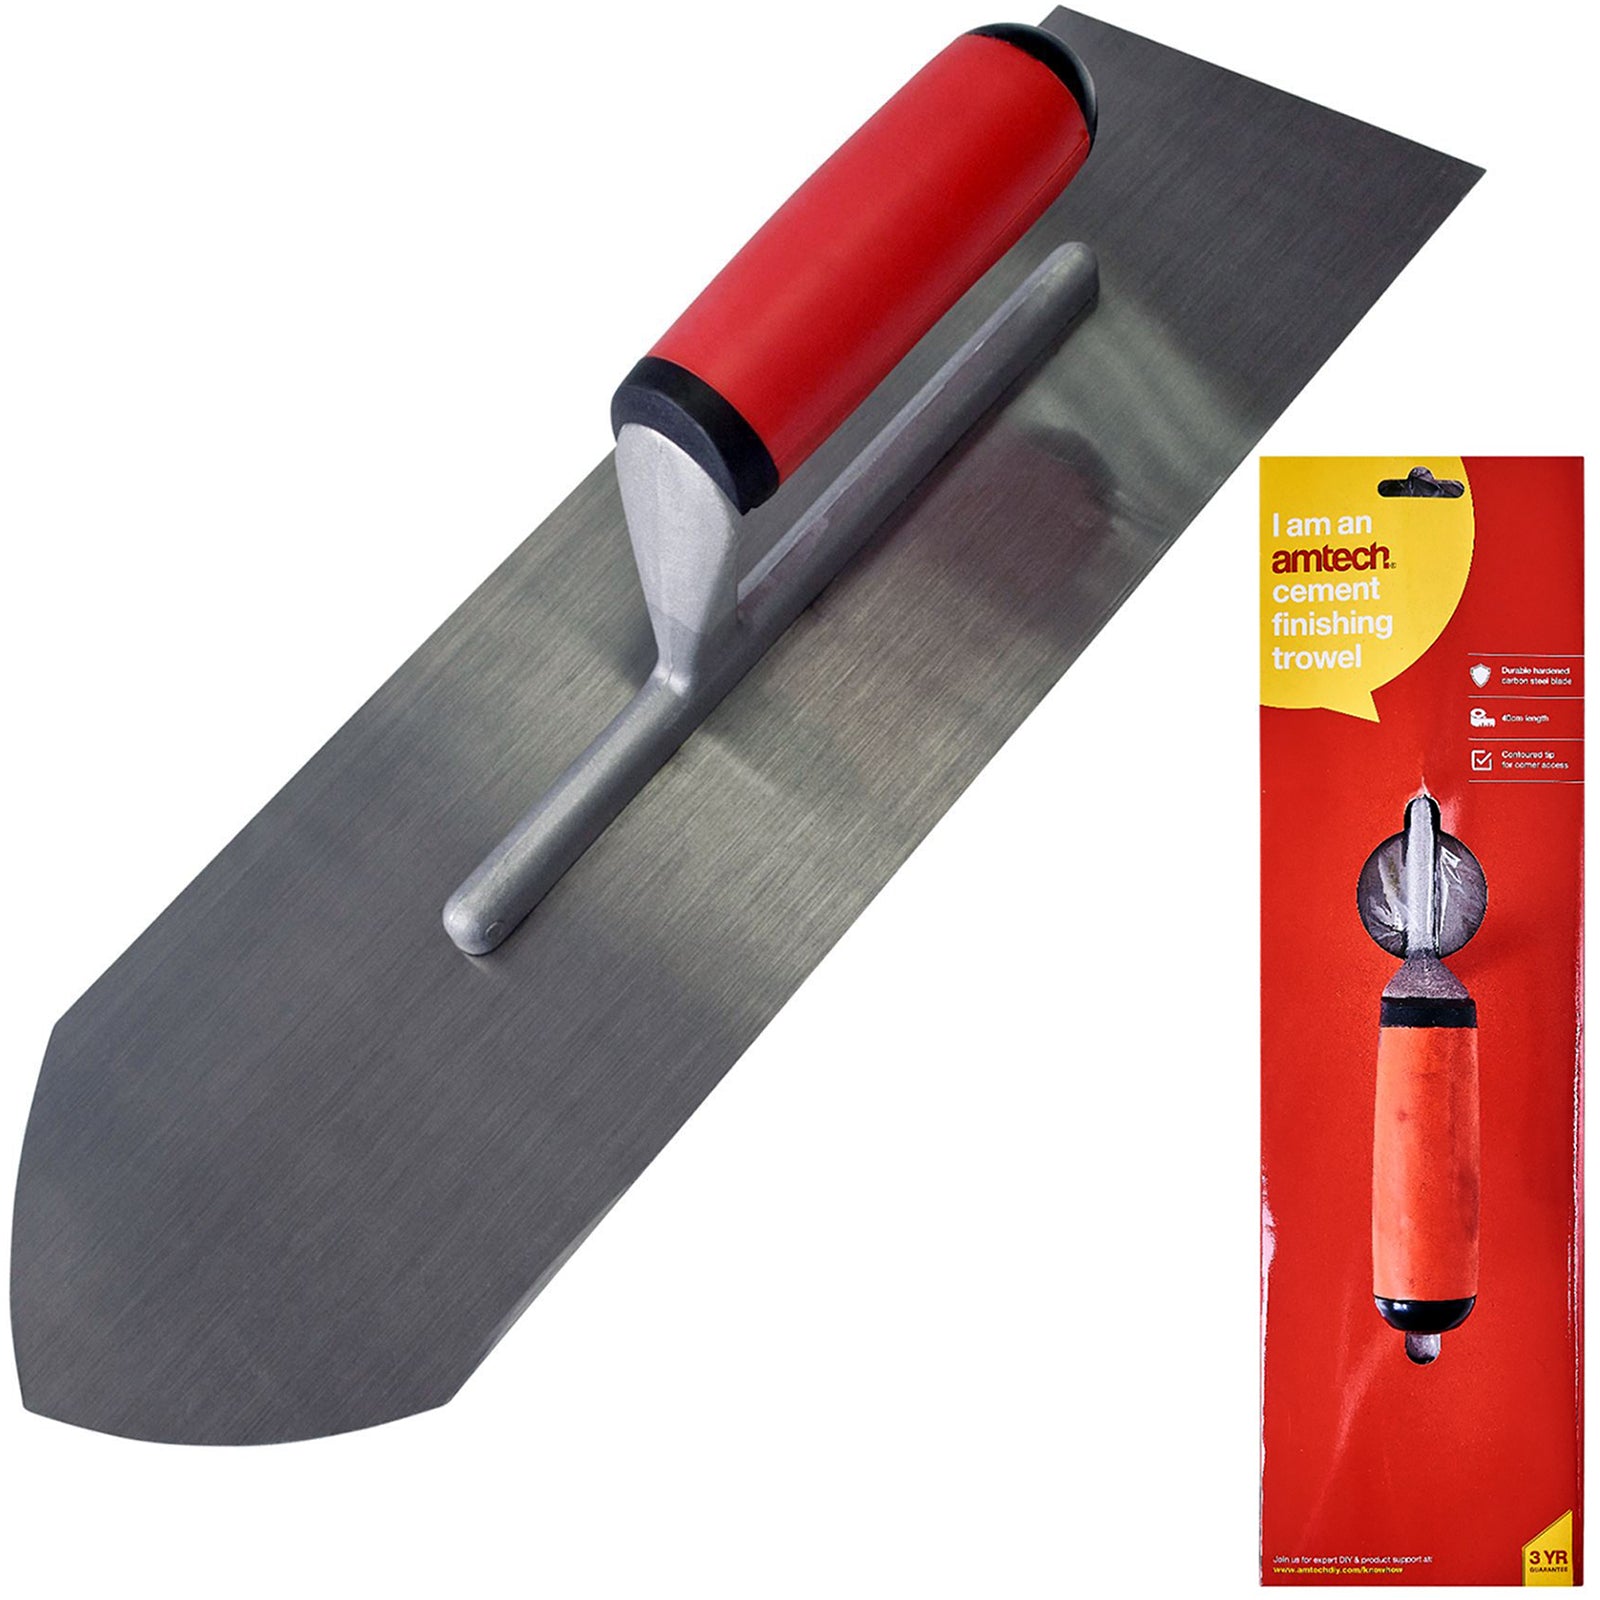 Amtech 400mm (16") Cement Finishing Trowel with Soft Grip Handle